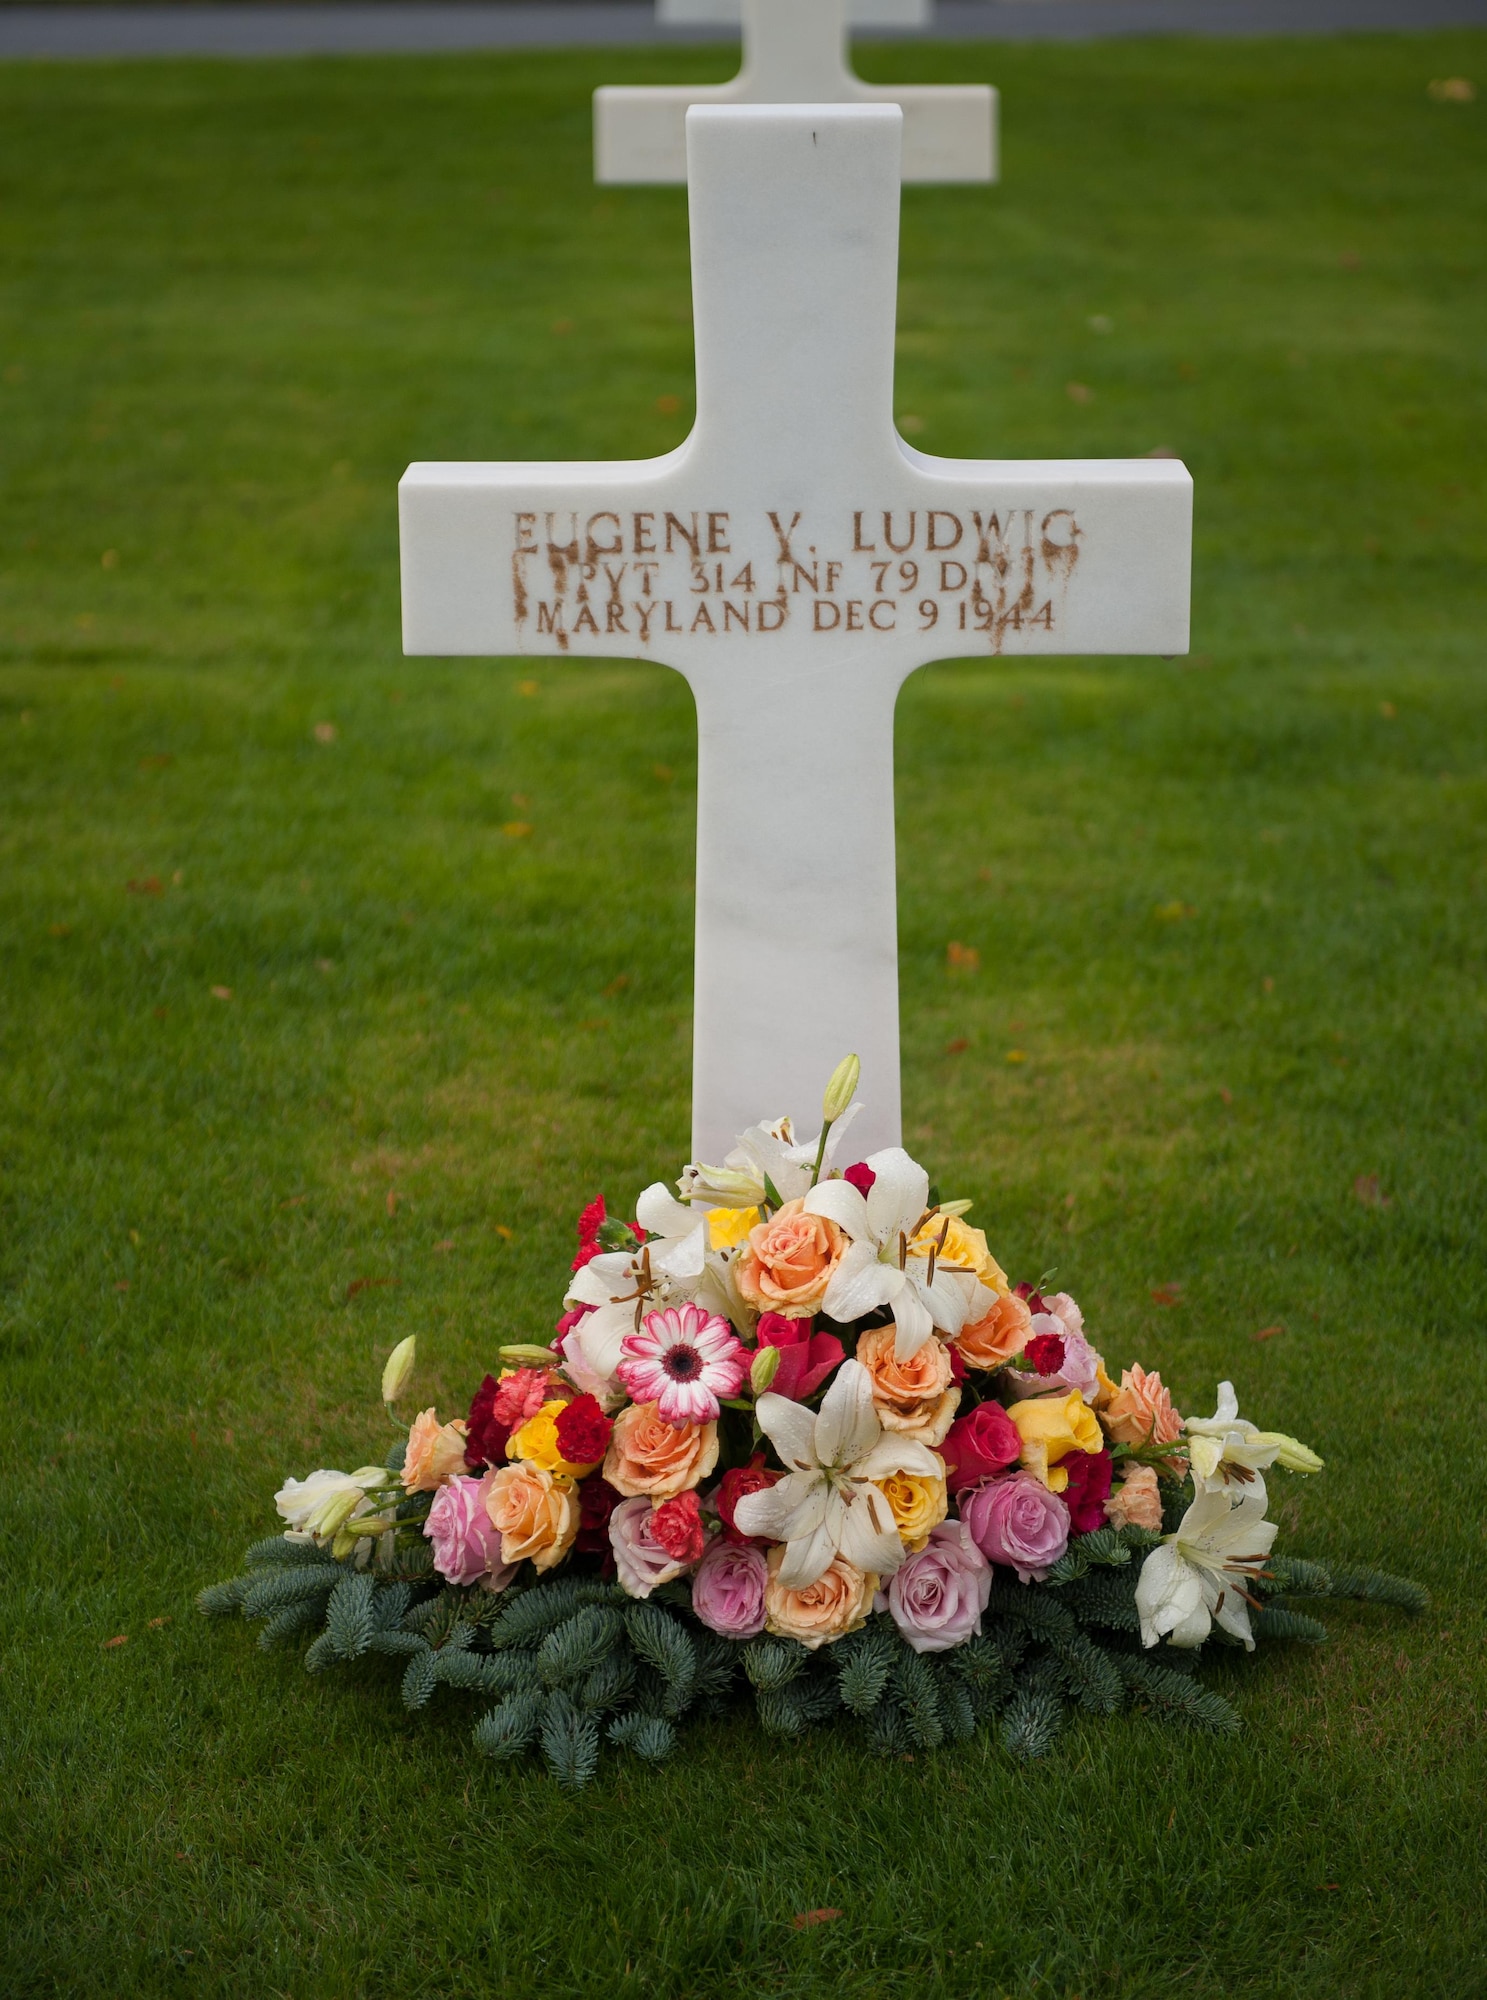 Flowers lay next to a deceased war veteran’s gravestone at the Lorraine American Cemetery Nov. 11, 2016, at St. Avold, France. Veterans Day is observed annually on November 11 and commemorates military veterans who currently serve or have served the U.S. armed forces, including those who gave the ultimate sacrifice. According to the DoD and Veterans Administration, since World War I, approximately 624,000 U.S. servicemembers have been killed in action battling in wars and conflicts. The Lorraine American Cemetery contains the buried remains of over 10,000 of them. It is the largest burial site of U.S. servicemembers in Europe. (U.S. Air Force photo by Airman 1st Class Lane T. Plummer)